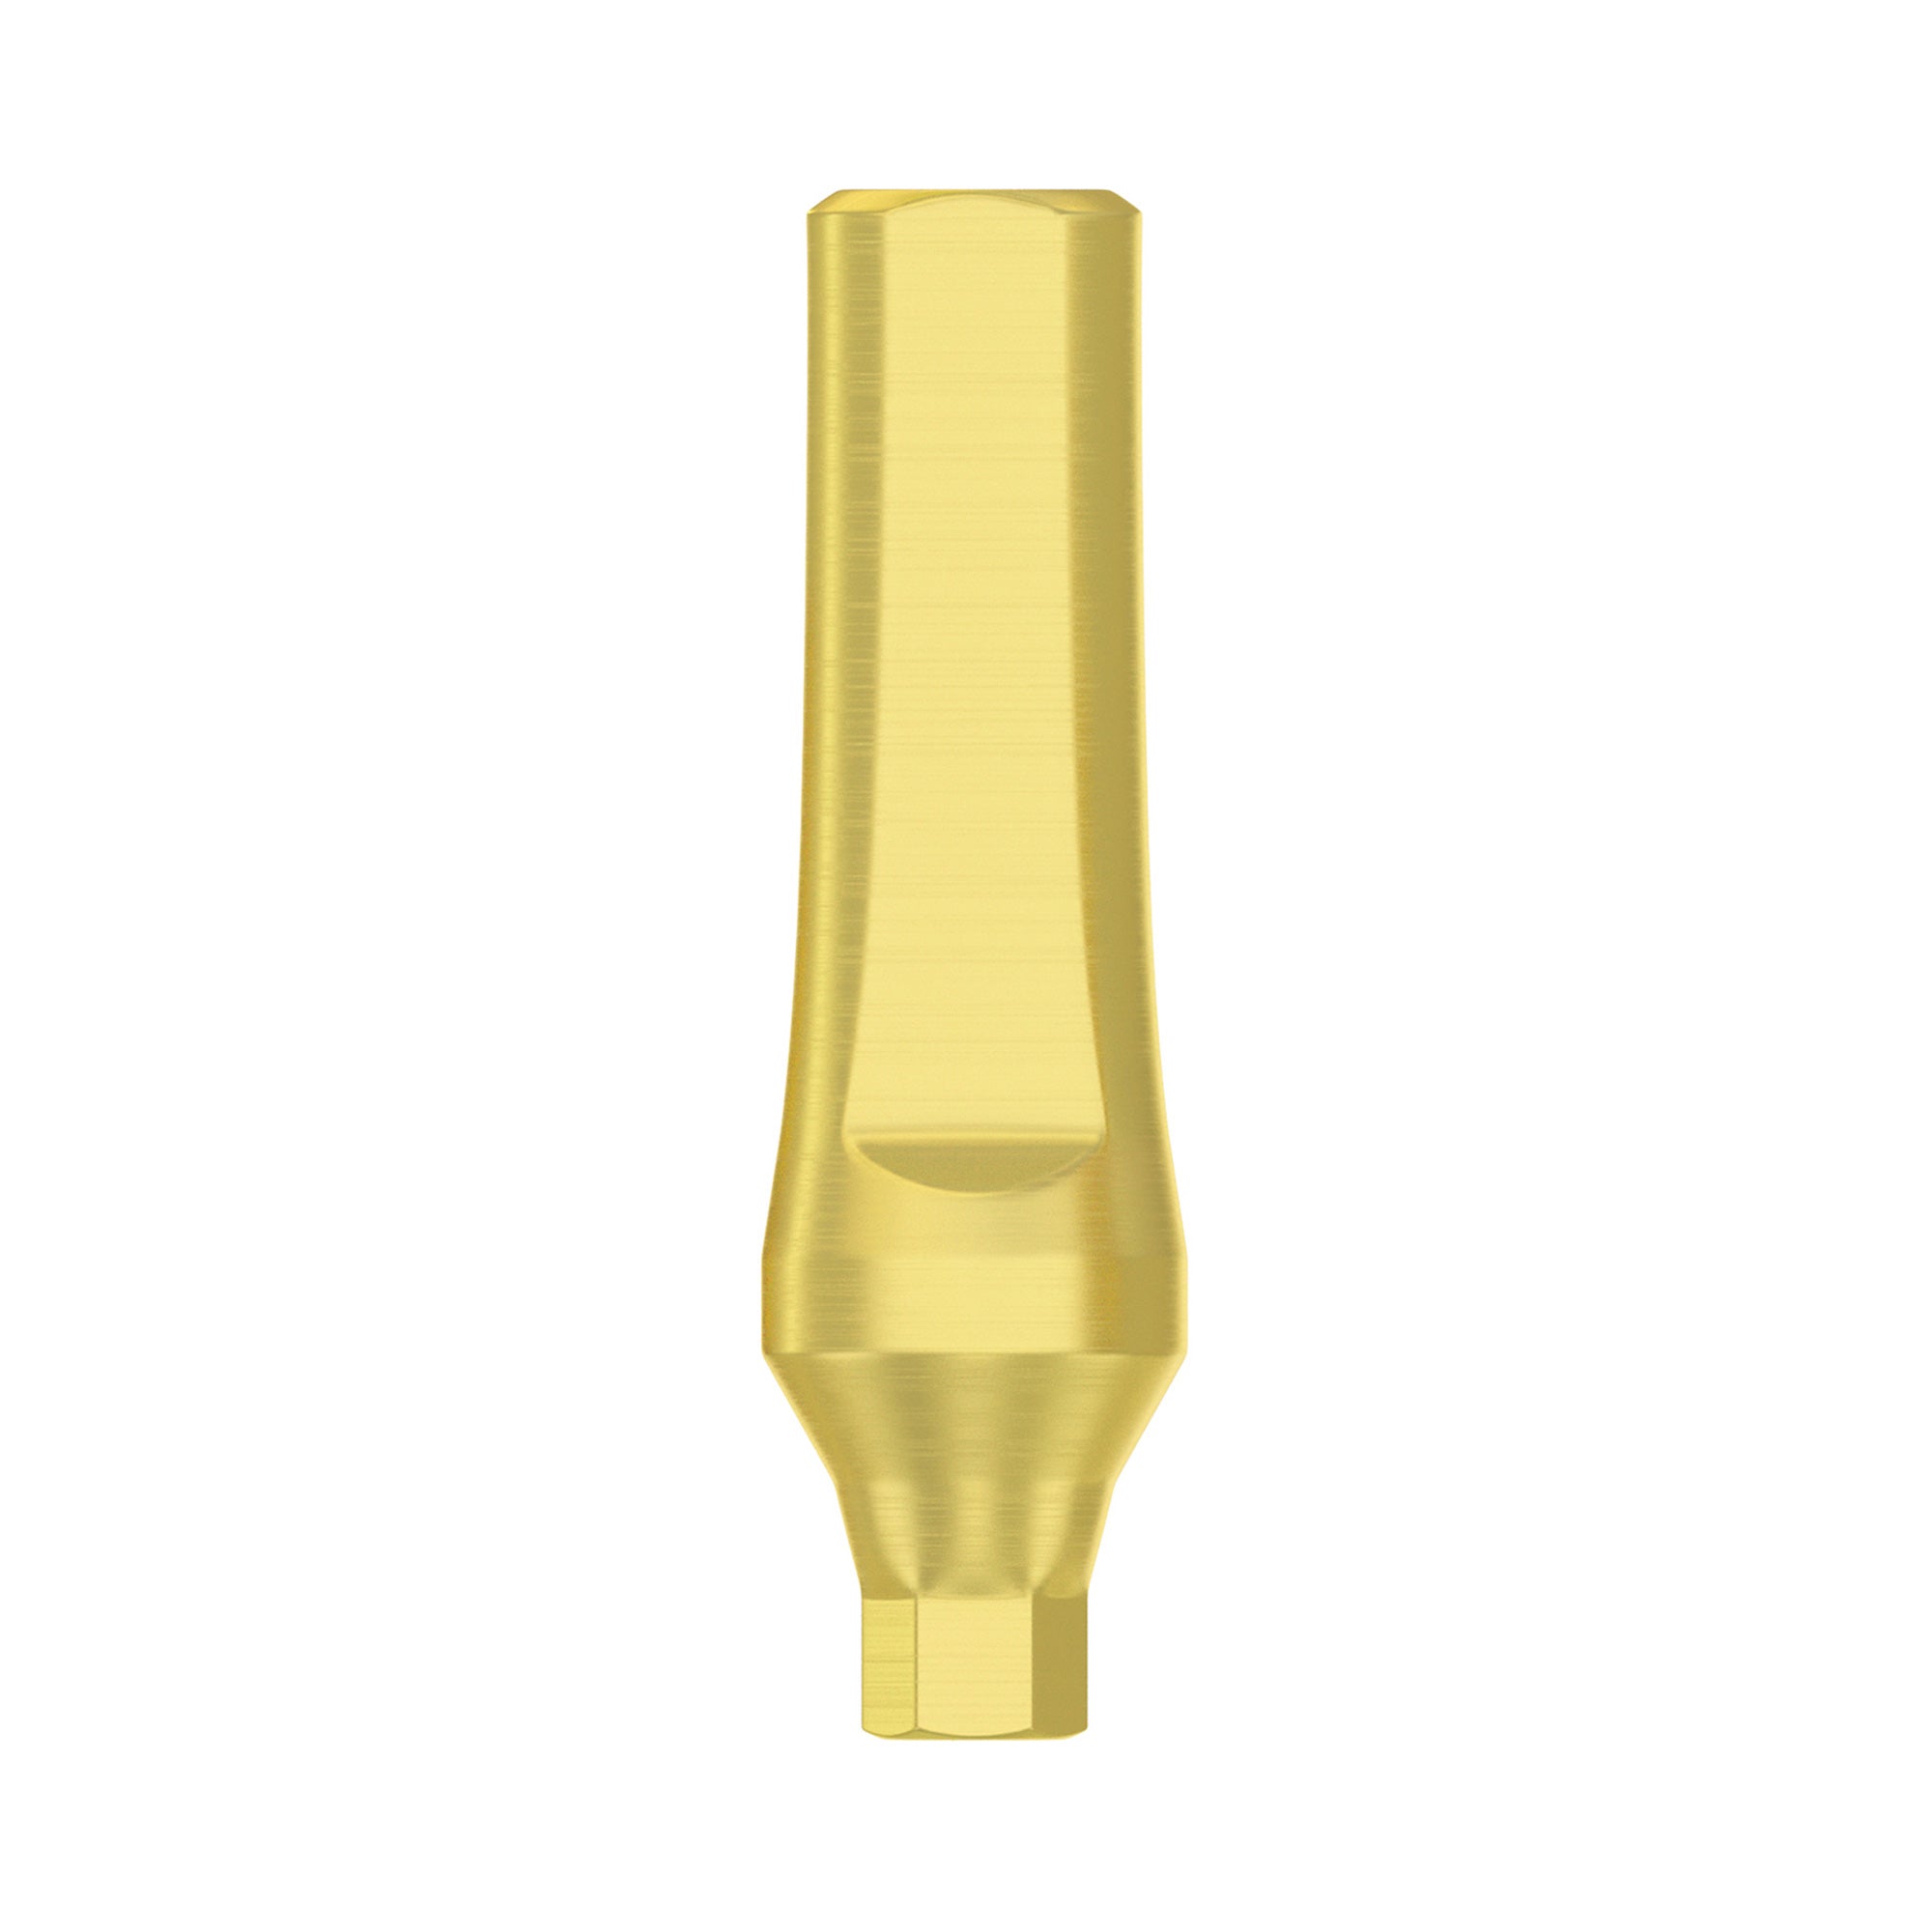 DSI Standart Straight Abutment - Conical Connection RP Ø4.3-5.0mm